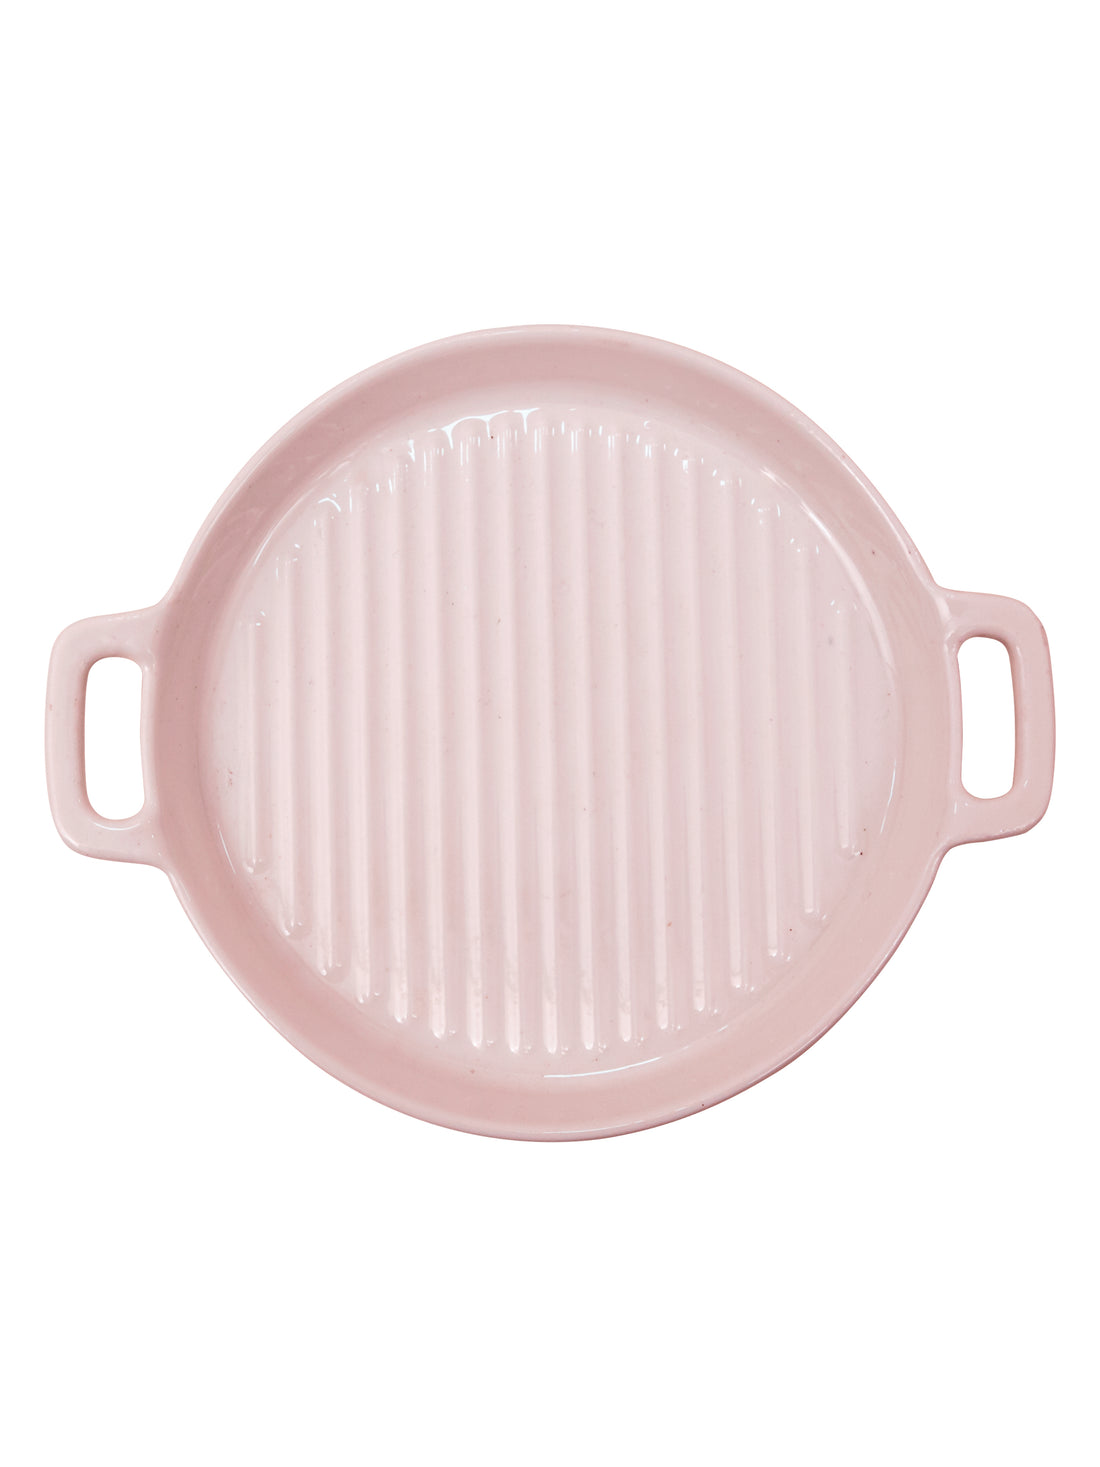 Ceramic Round with Handle Grill Plates for Serving, Pink Color